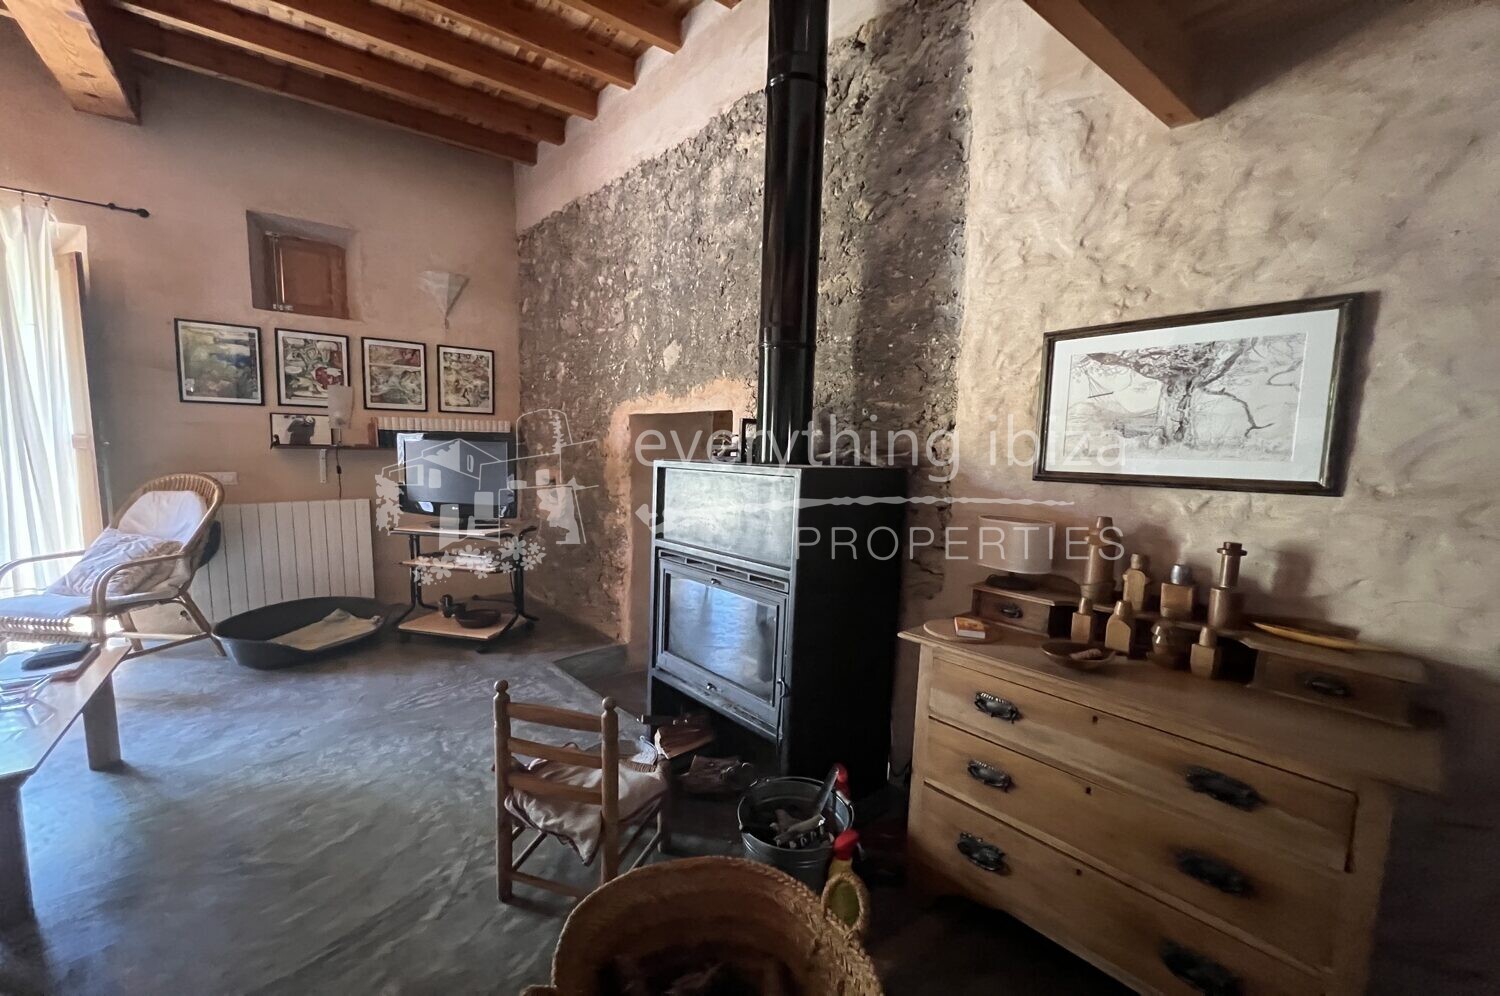 Traditional Finca & Casita on a Large Country Plot, ref. 1457, for sale in Ibiza by everything ibiza Properties